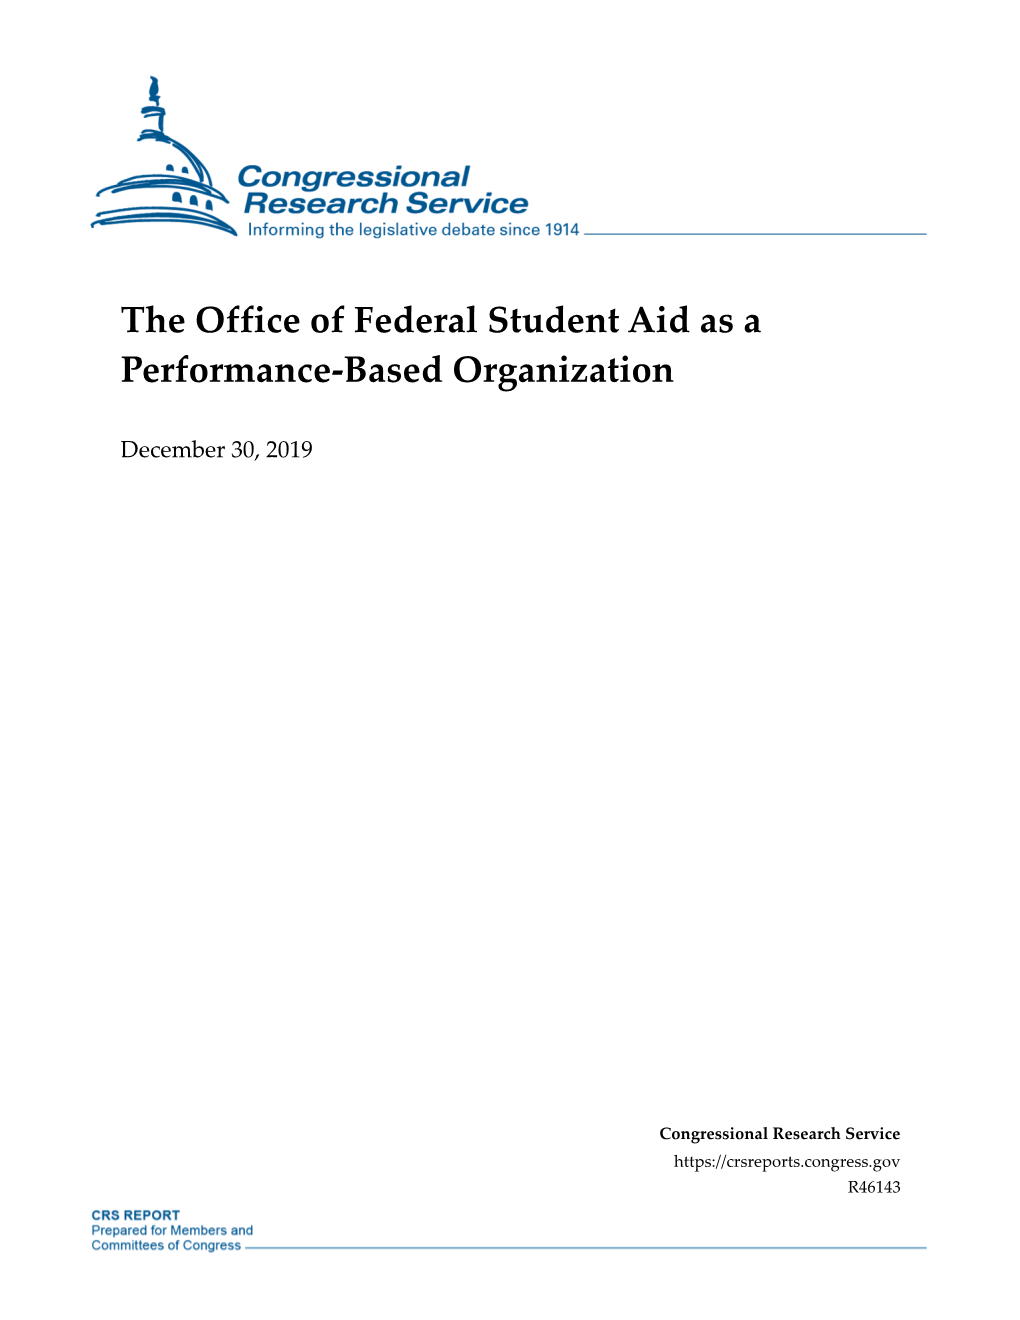 The Office of Federal Student Aid As a Performance-Based Organization